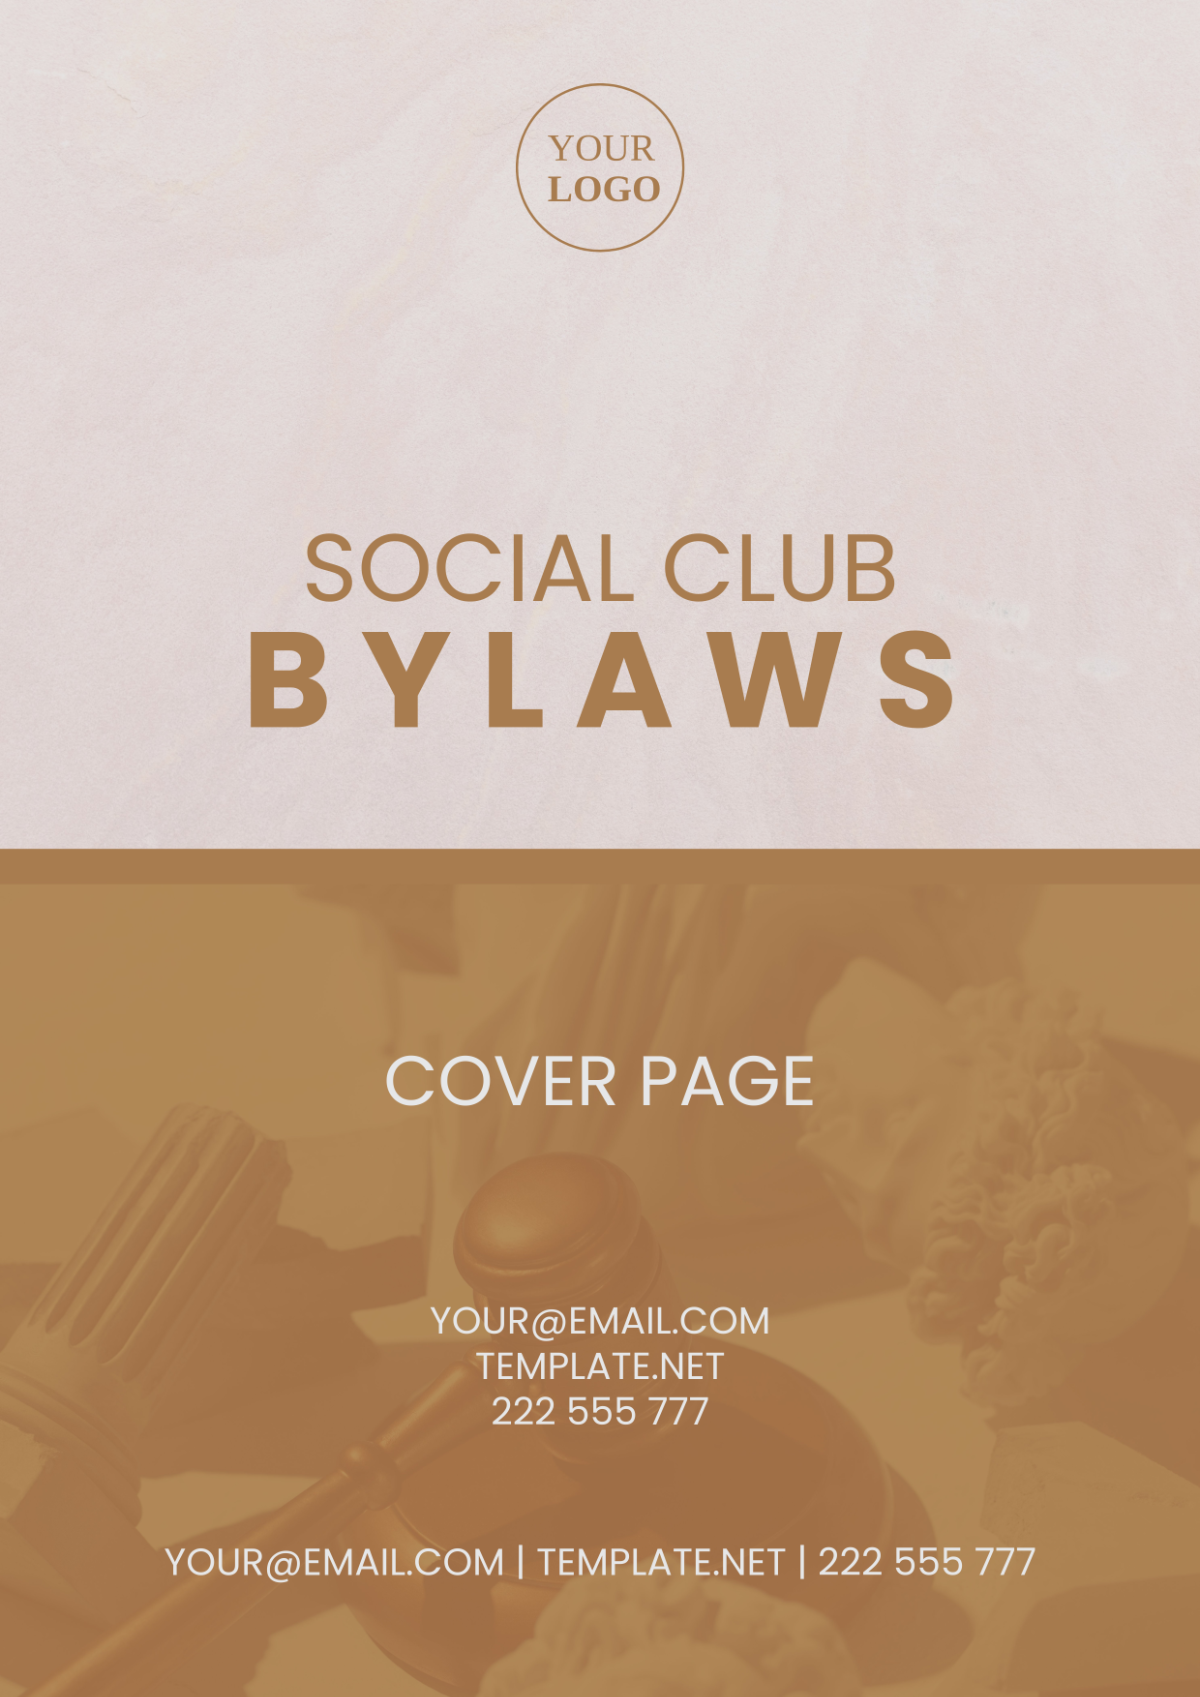 Social Club Bylaws Cover Page